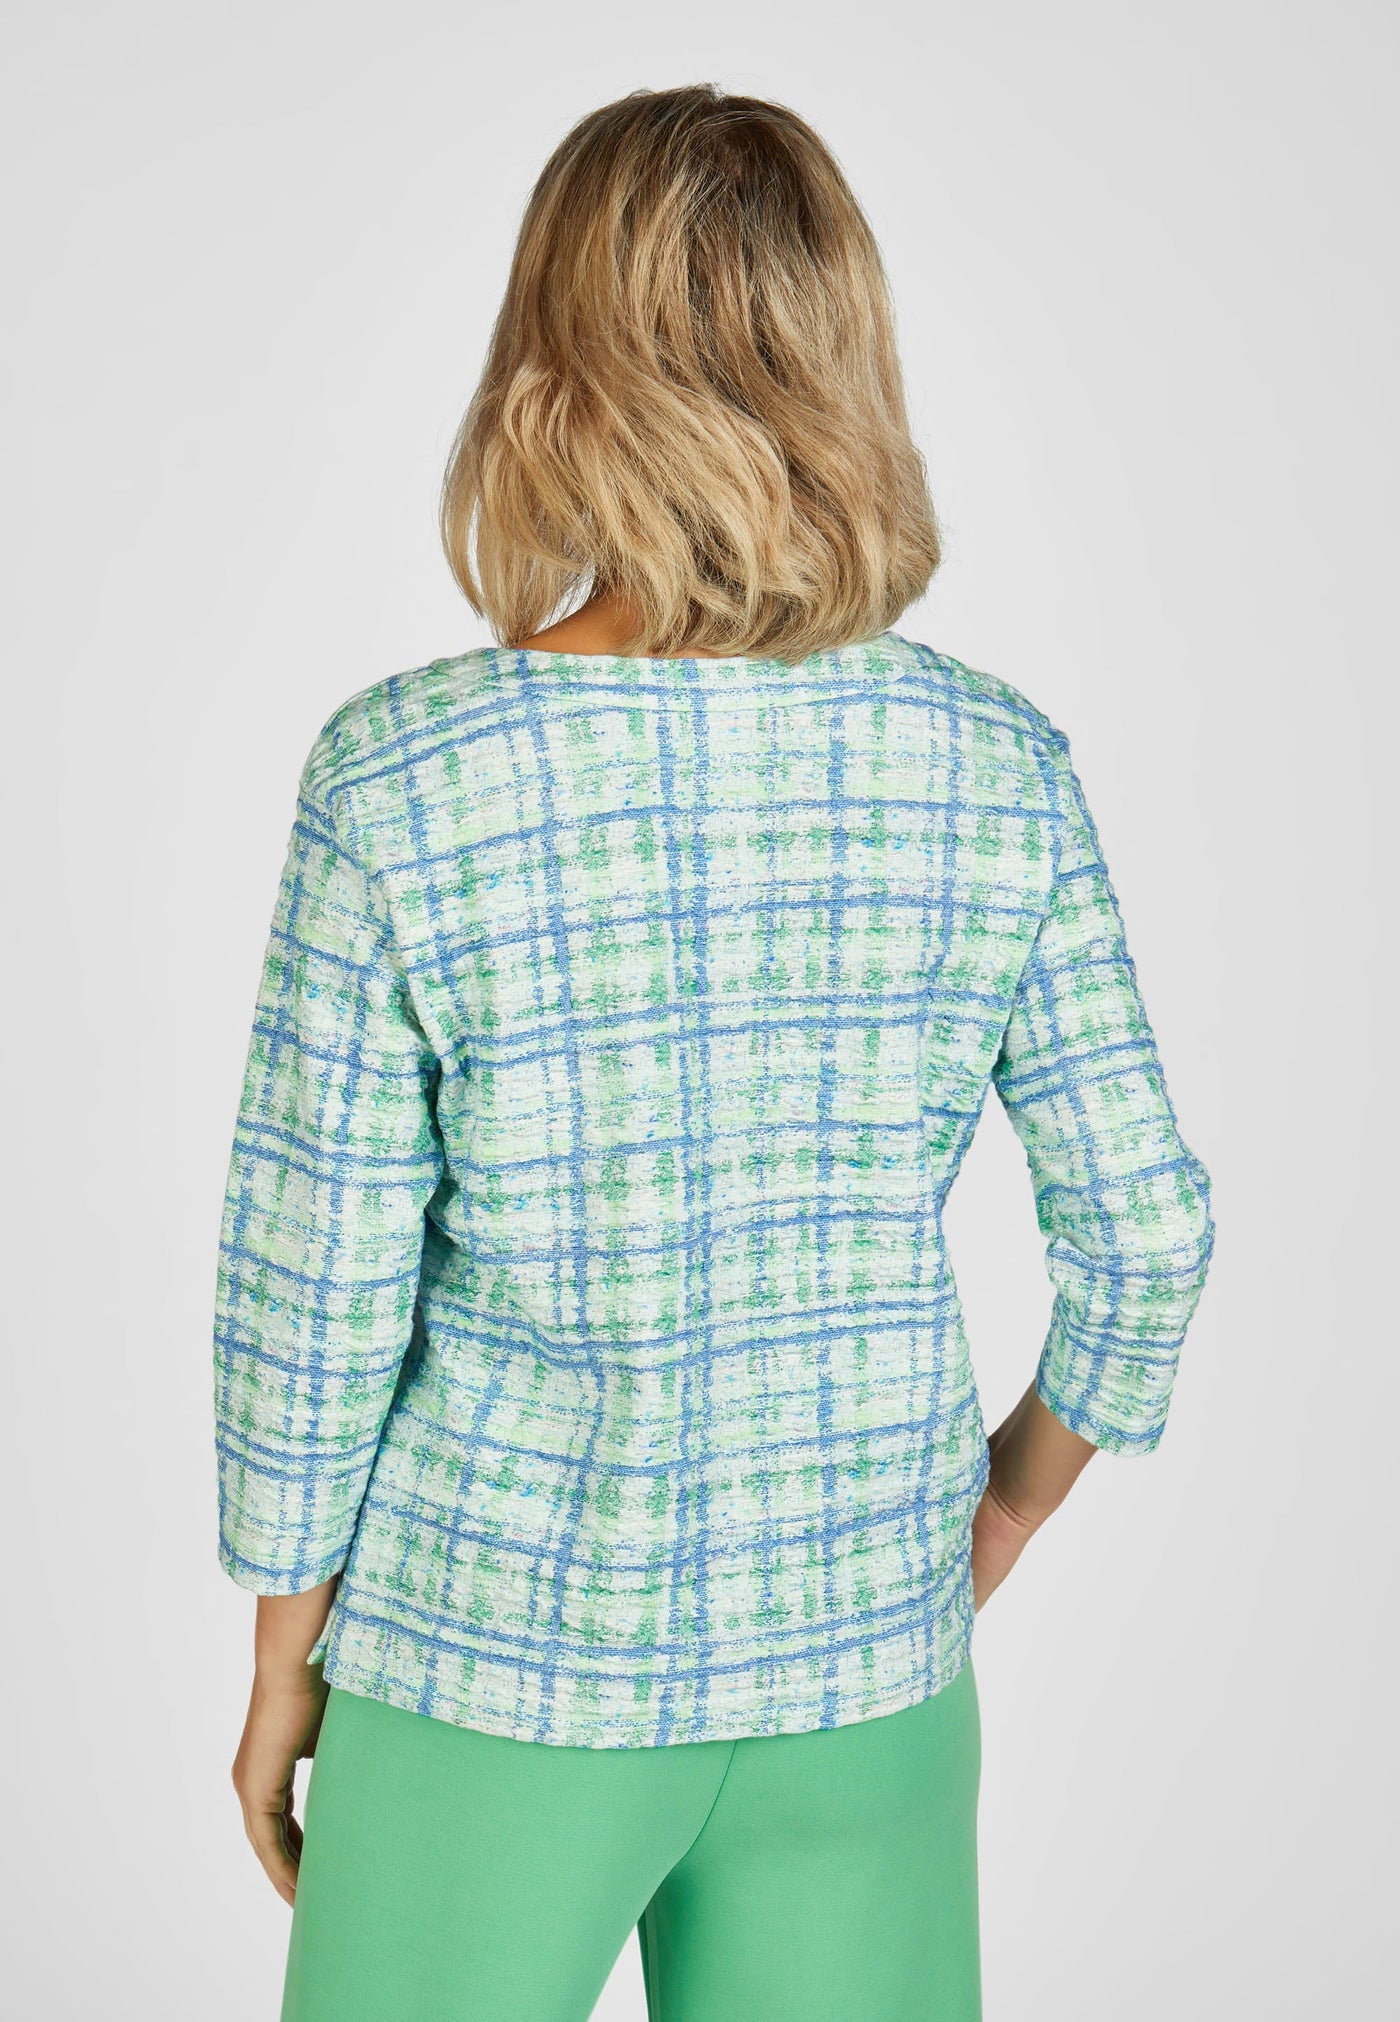 Blue and Green Checkered Print Top